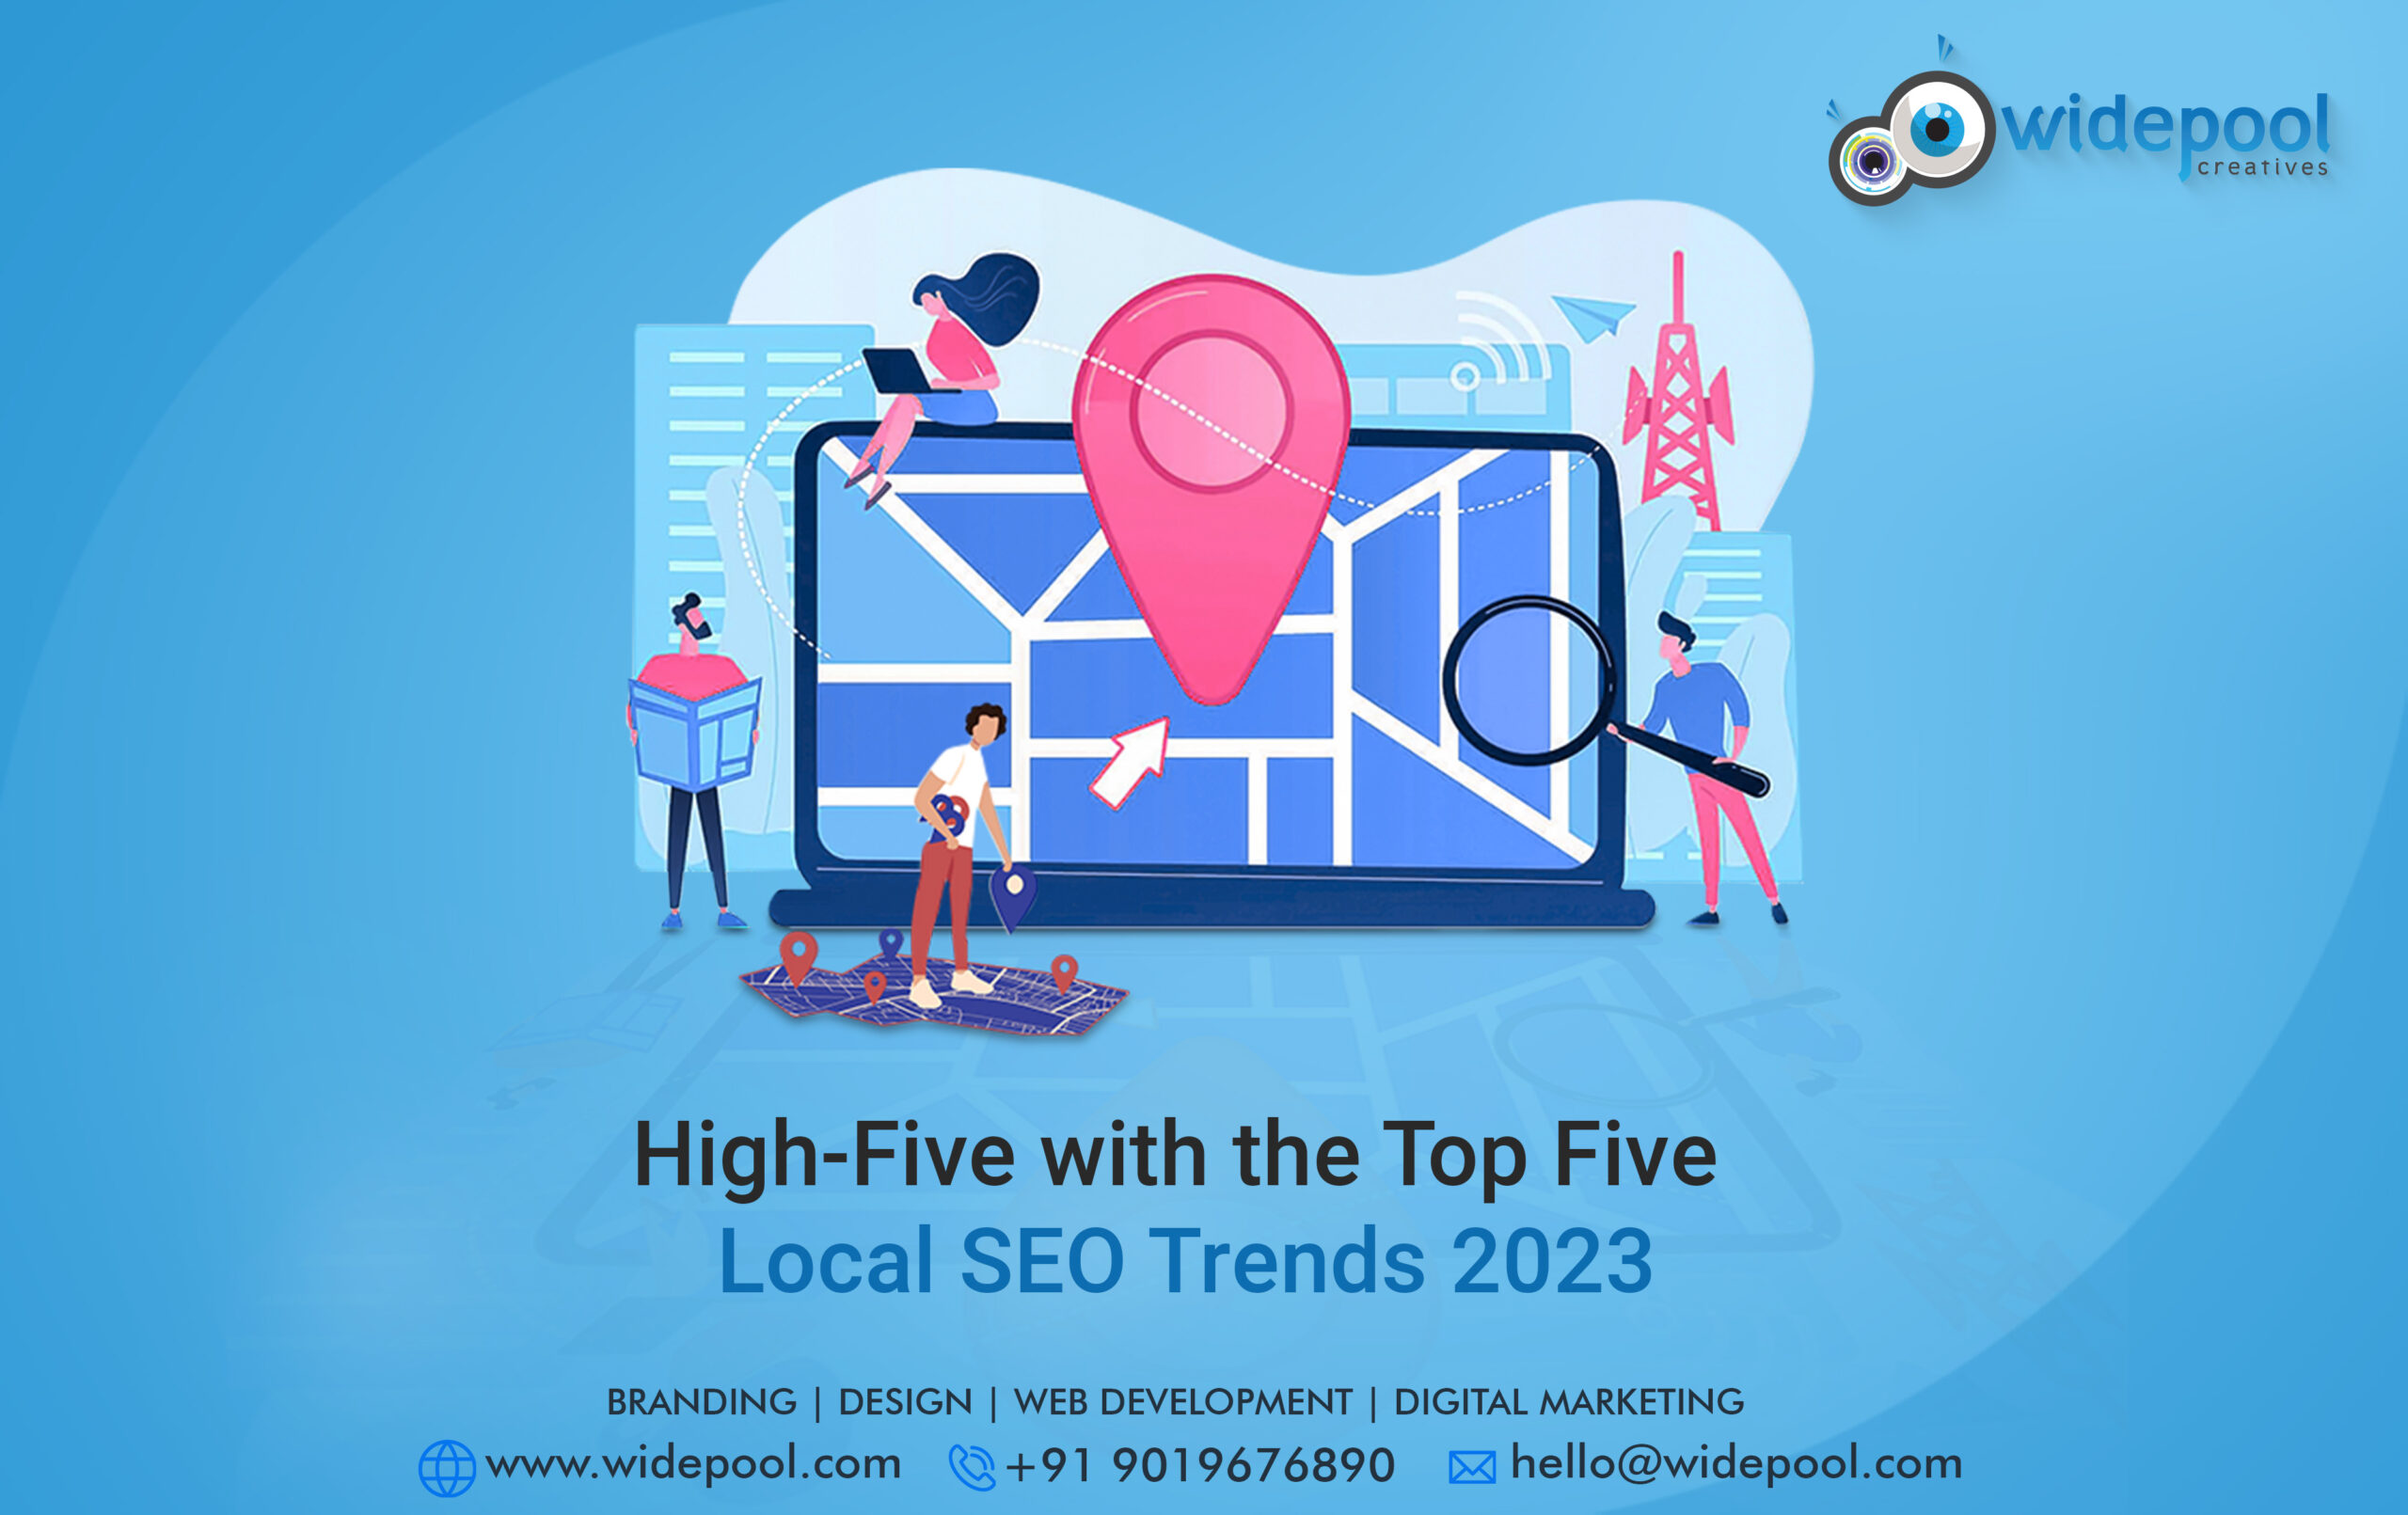 High-Five with the Top Five Local SEO Trends 2023